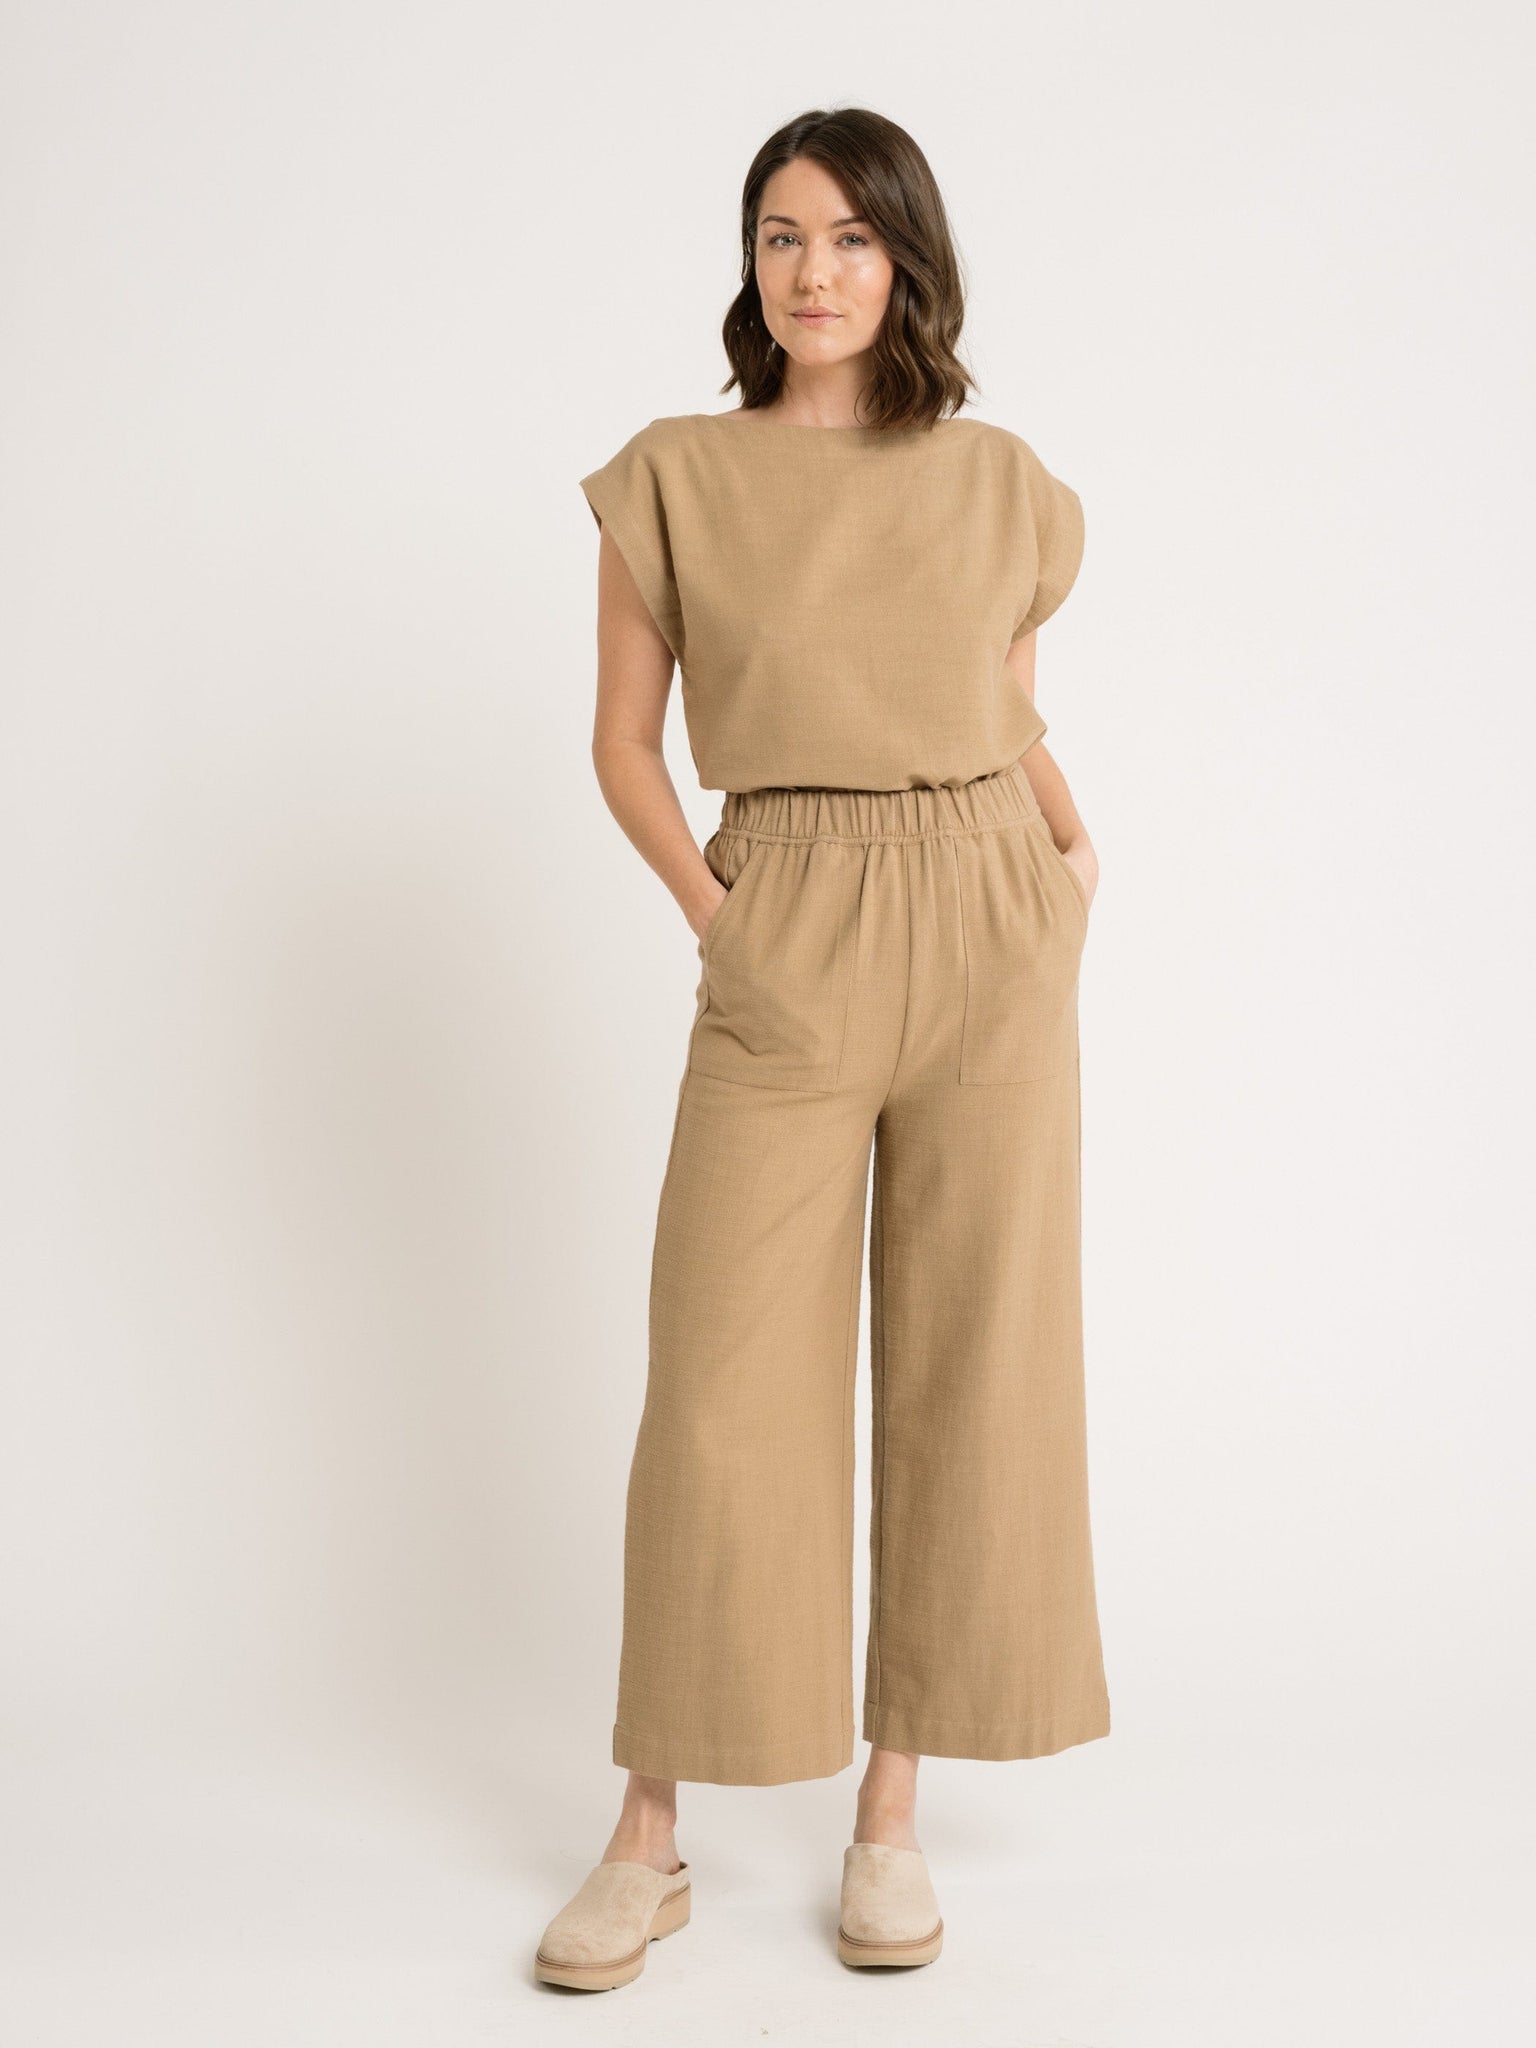 A model wearing a certified organic cotton Everyday Top - Tannin jumpsuit.